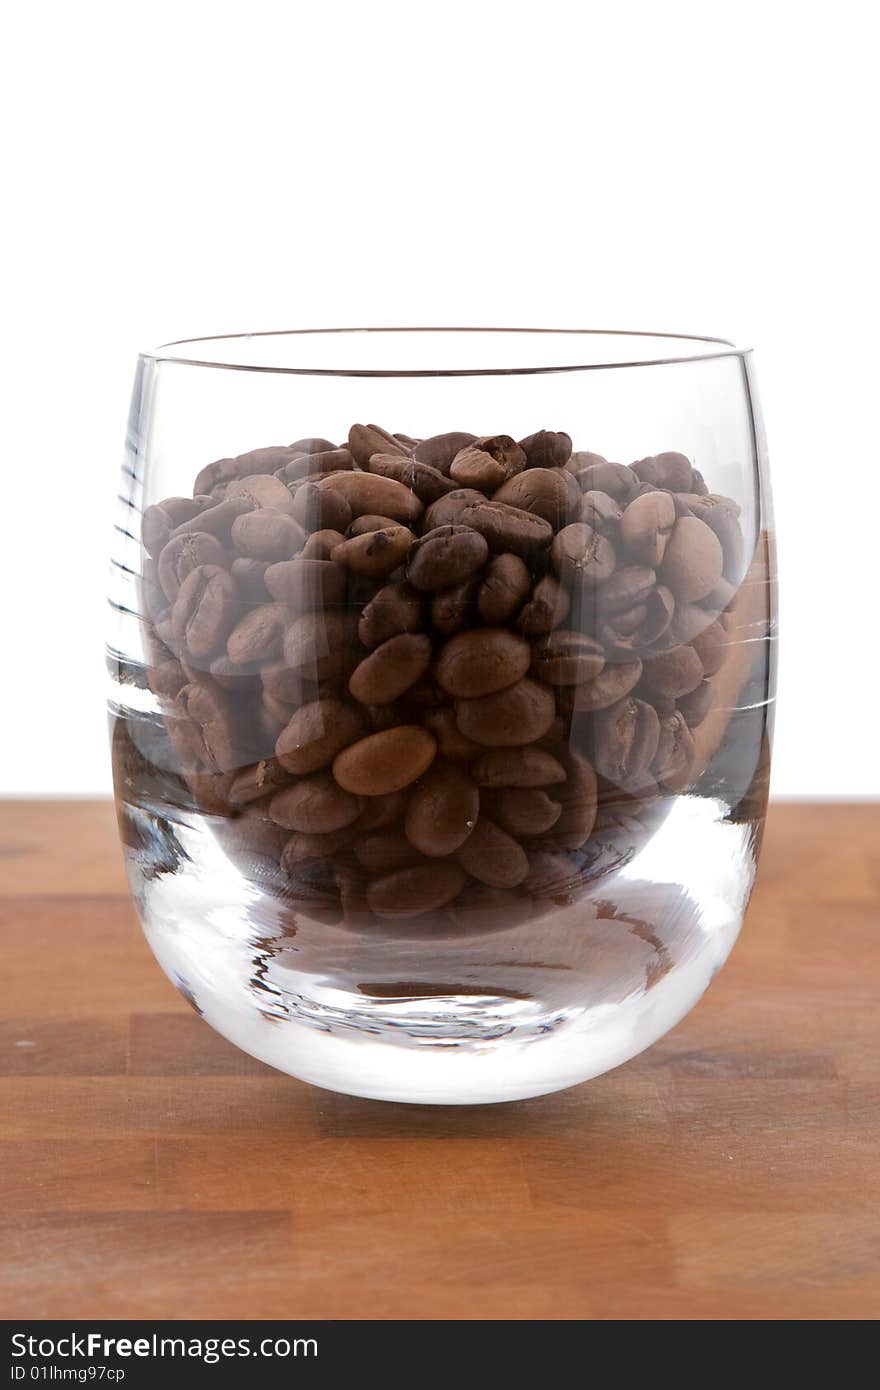 Coffea beans in glass on wooden table, white background